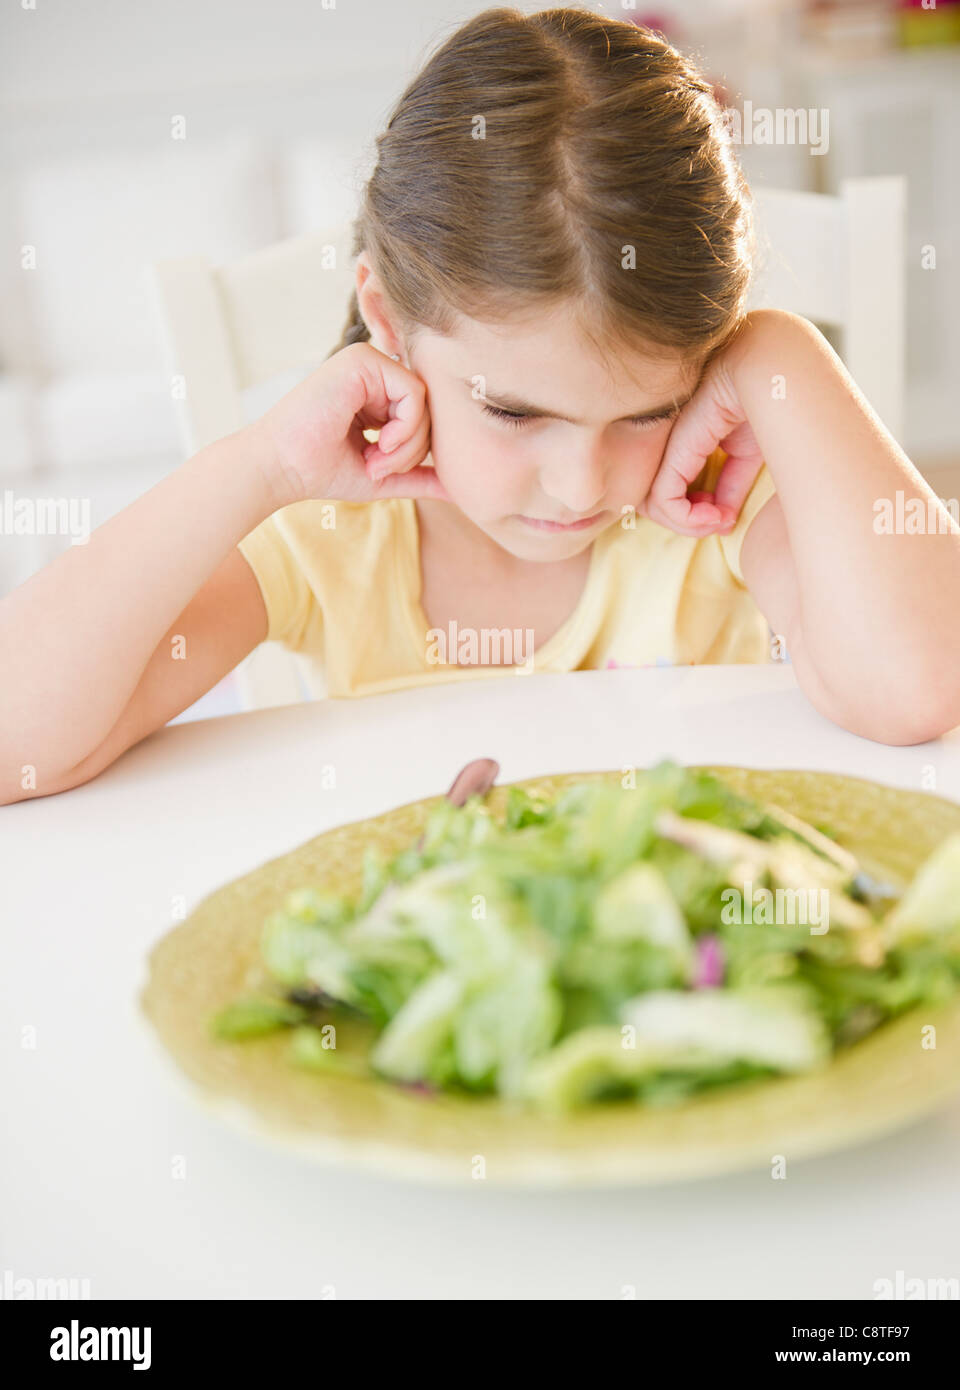 USA, New Jersey, Jersey City, Upset girl sitting at table with salad meal Stock Photo